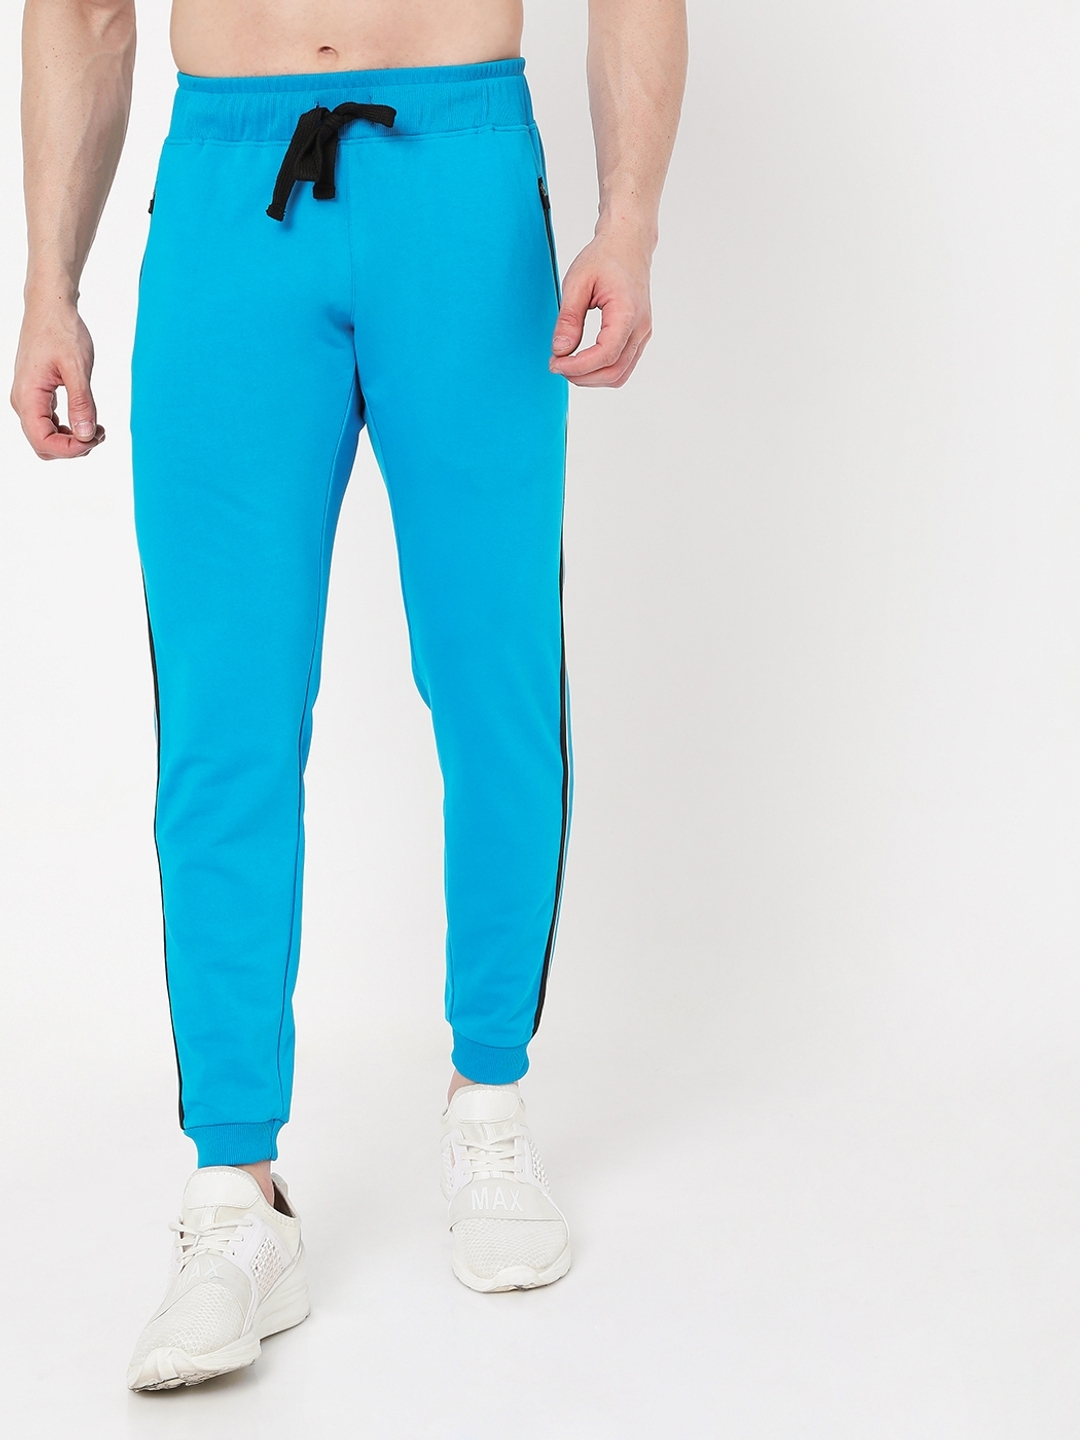 Men's Relaxed Lycra Track Pants / Regular Fit Jogger / Sport Wear Lower  /Perfect Gym Pants /Stretchable Running Trousers /Nightwear and Daily Use Slim  Fit Track Pants with Zipper with Both Size Pockets